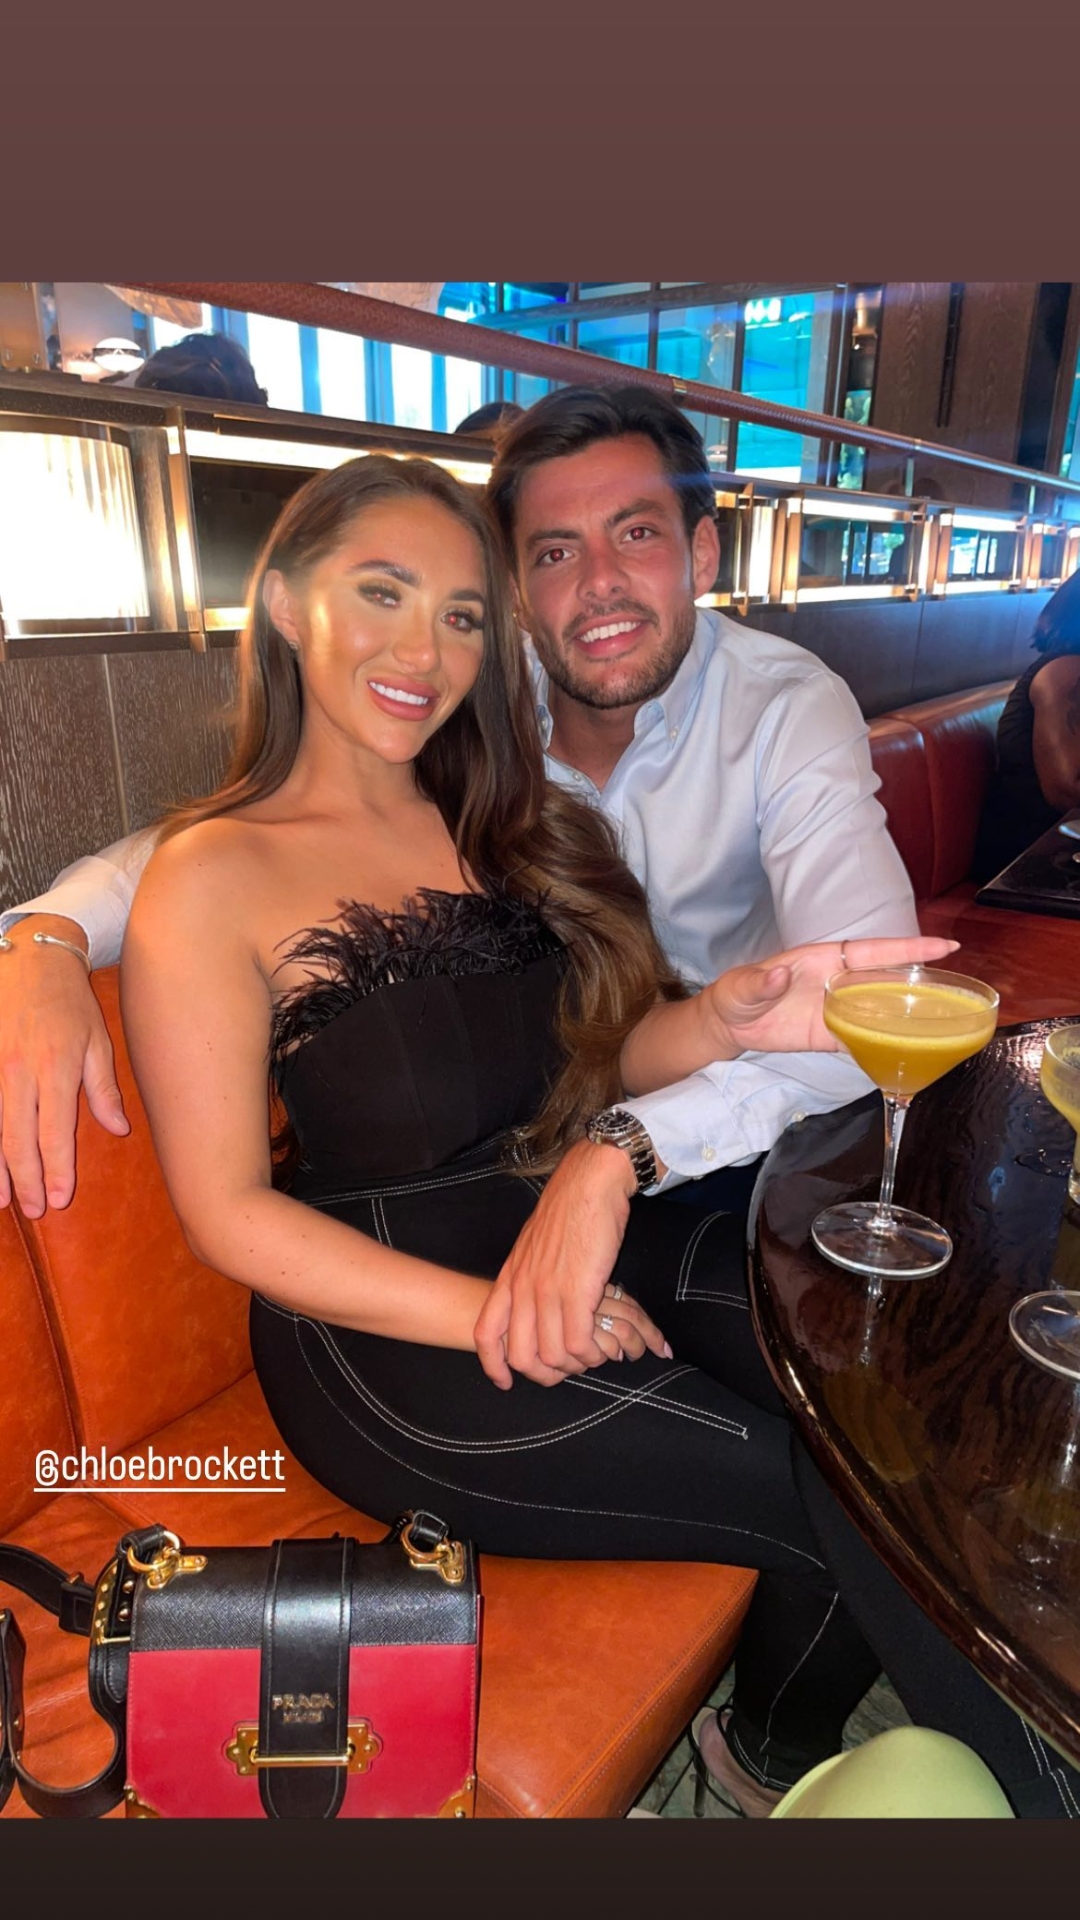 New Towie feud erupts as Chloe Brockett blasts ex who found love with reality star